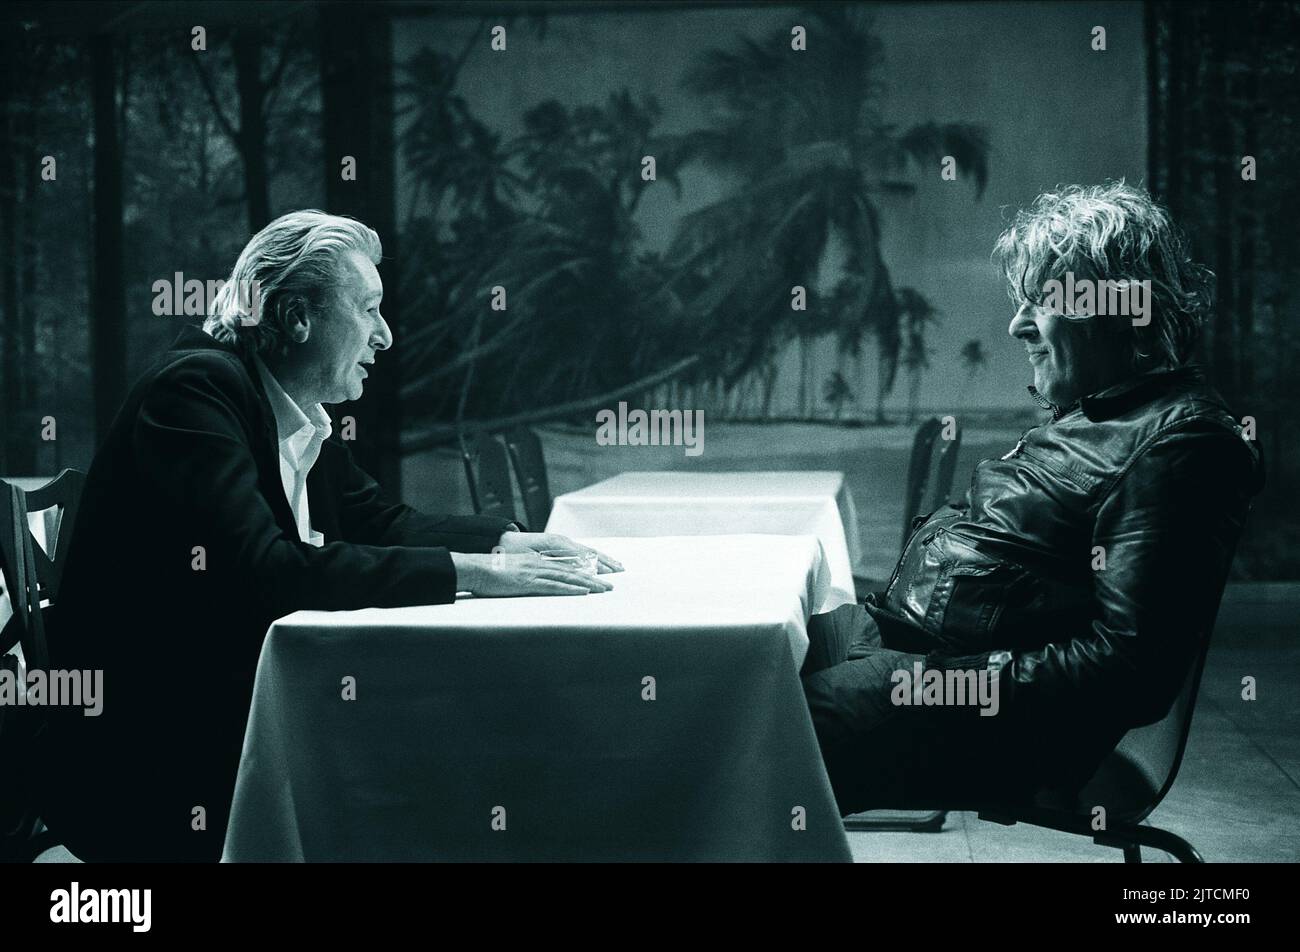 ALAIN BASHUNG, ARNO, I ALWAYS WANTED TO BE A GANGSTER, 2007 Stock Photo